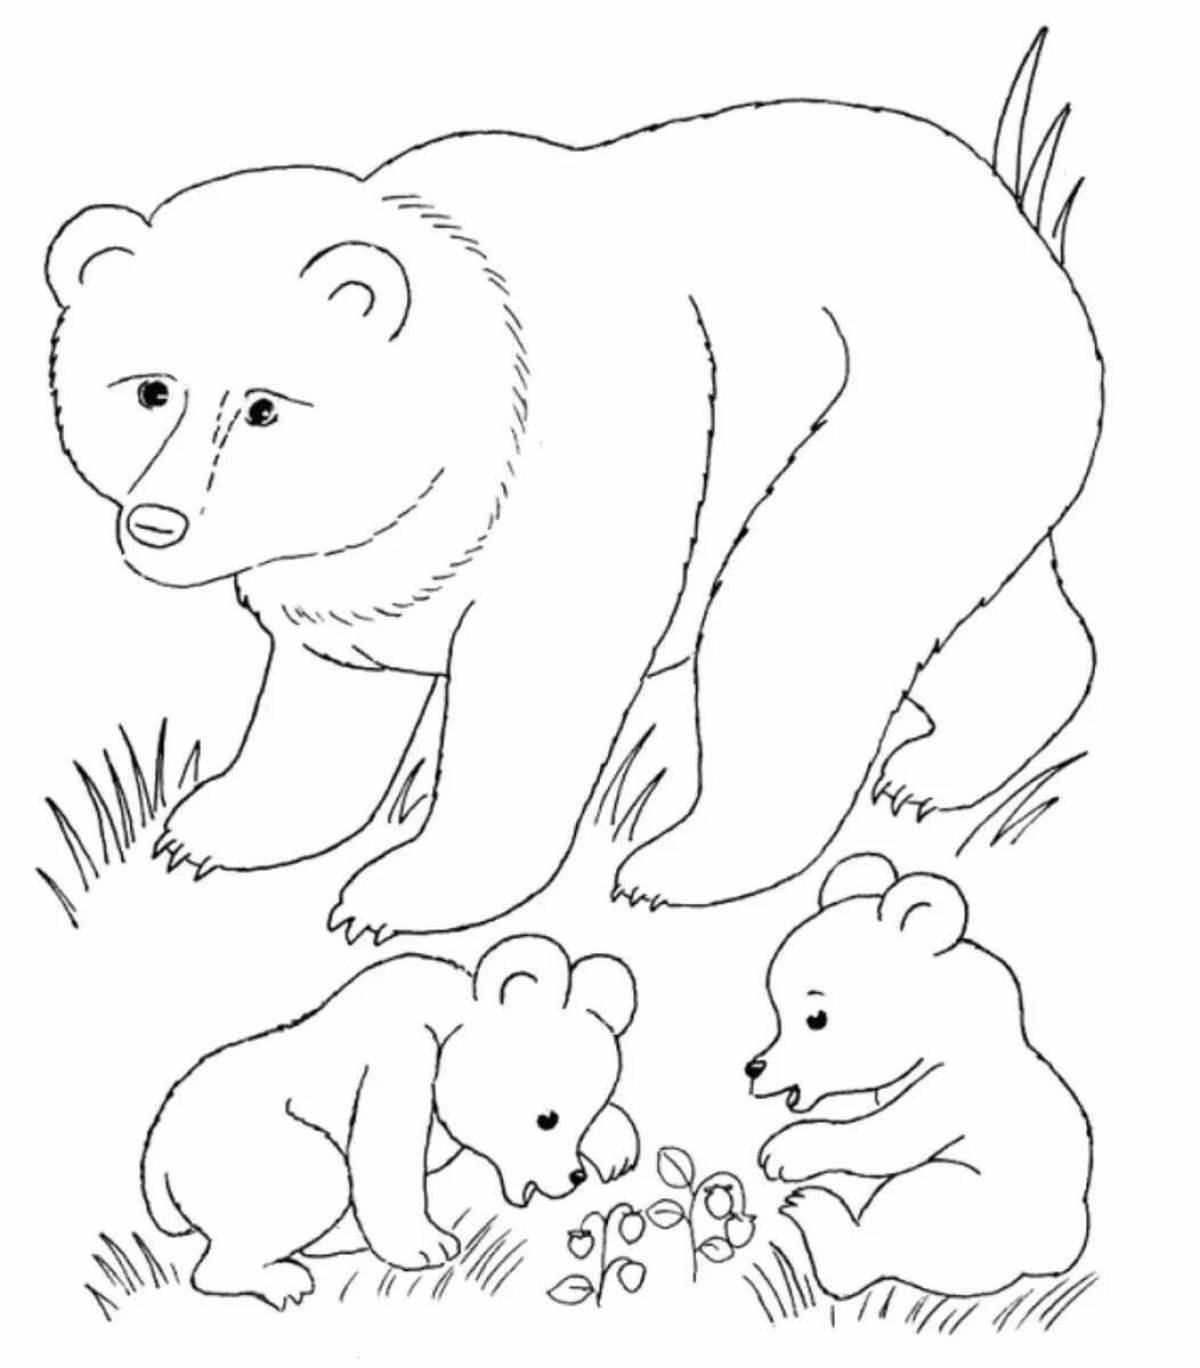 Cub and cub in love coloring page